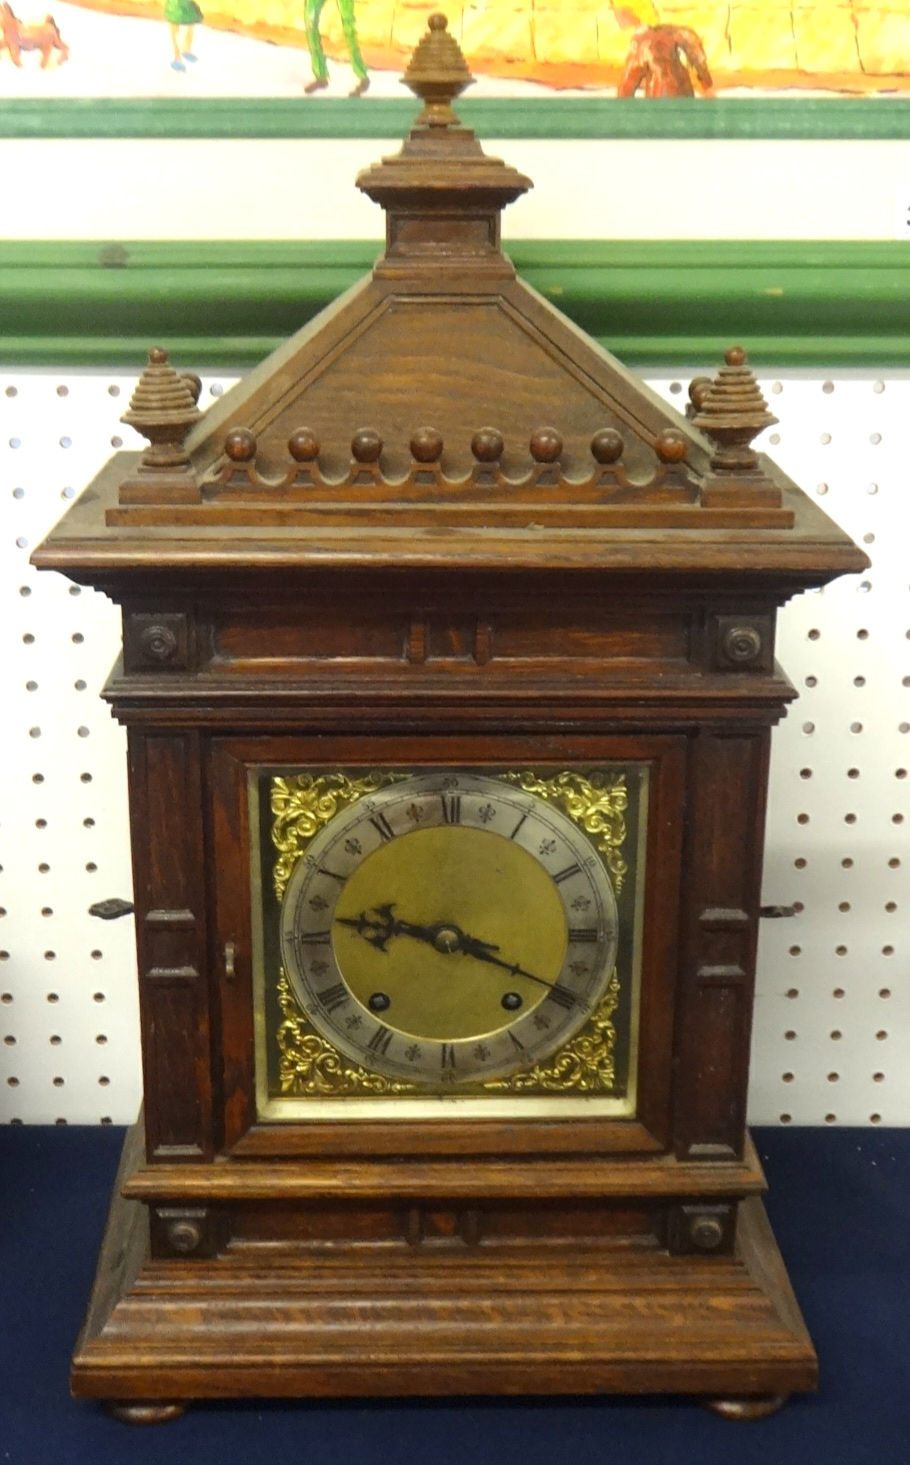 Victorian oak cased bracket clock, with 8 day movement striking on a gong, height 59cm